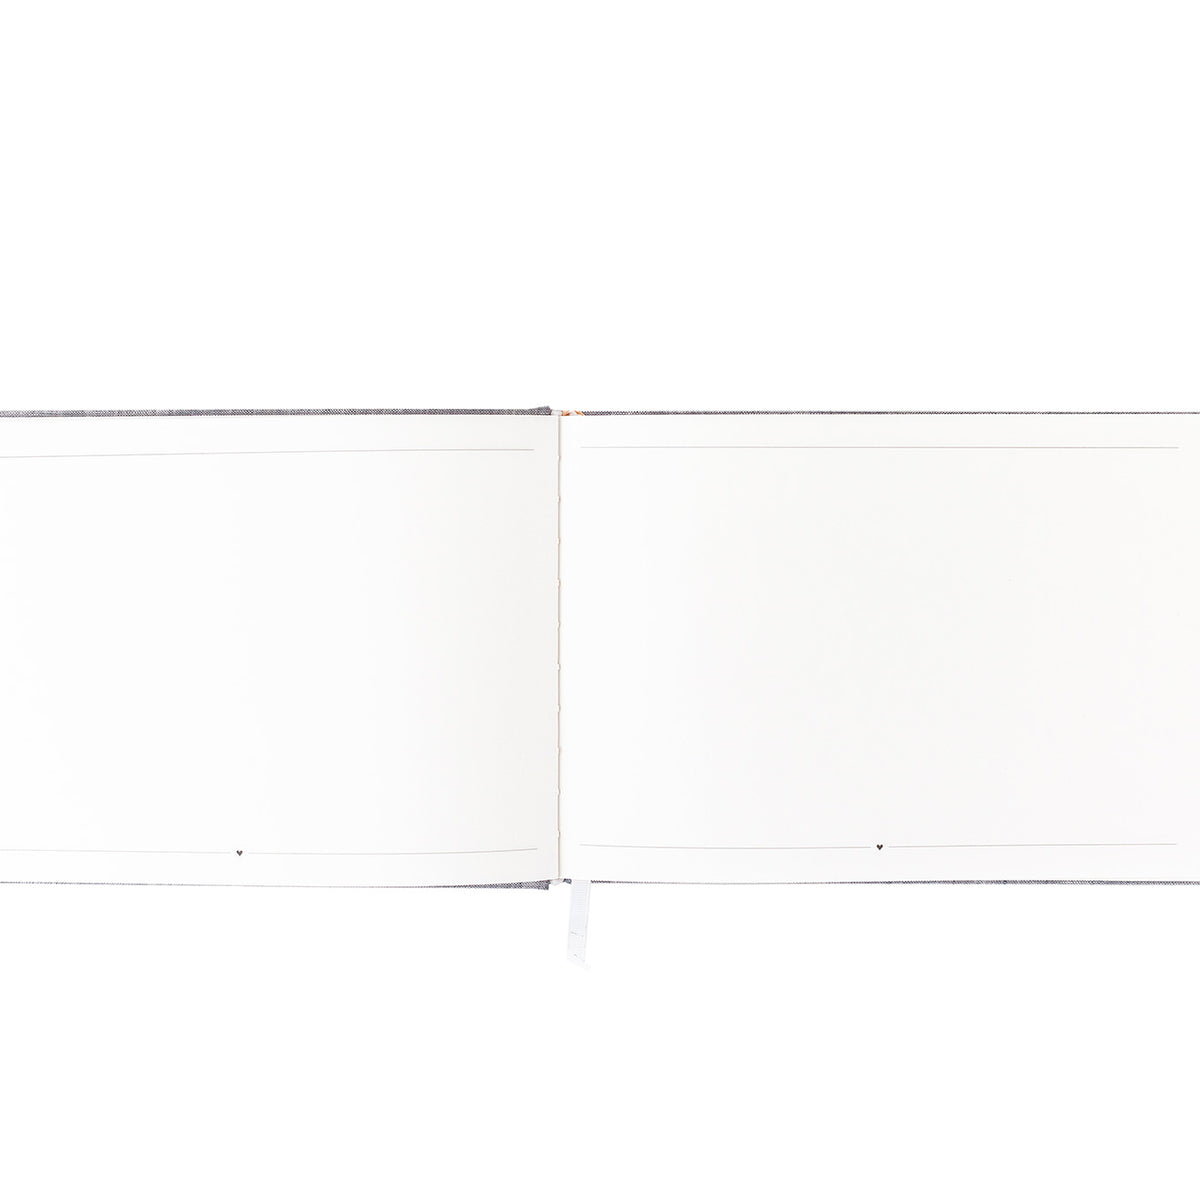 Interior blank pages of guest book